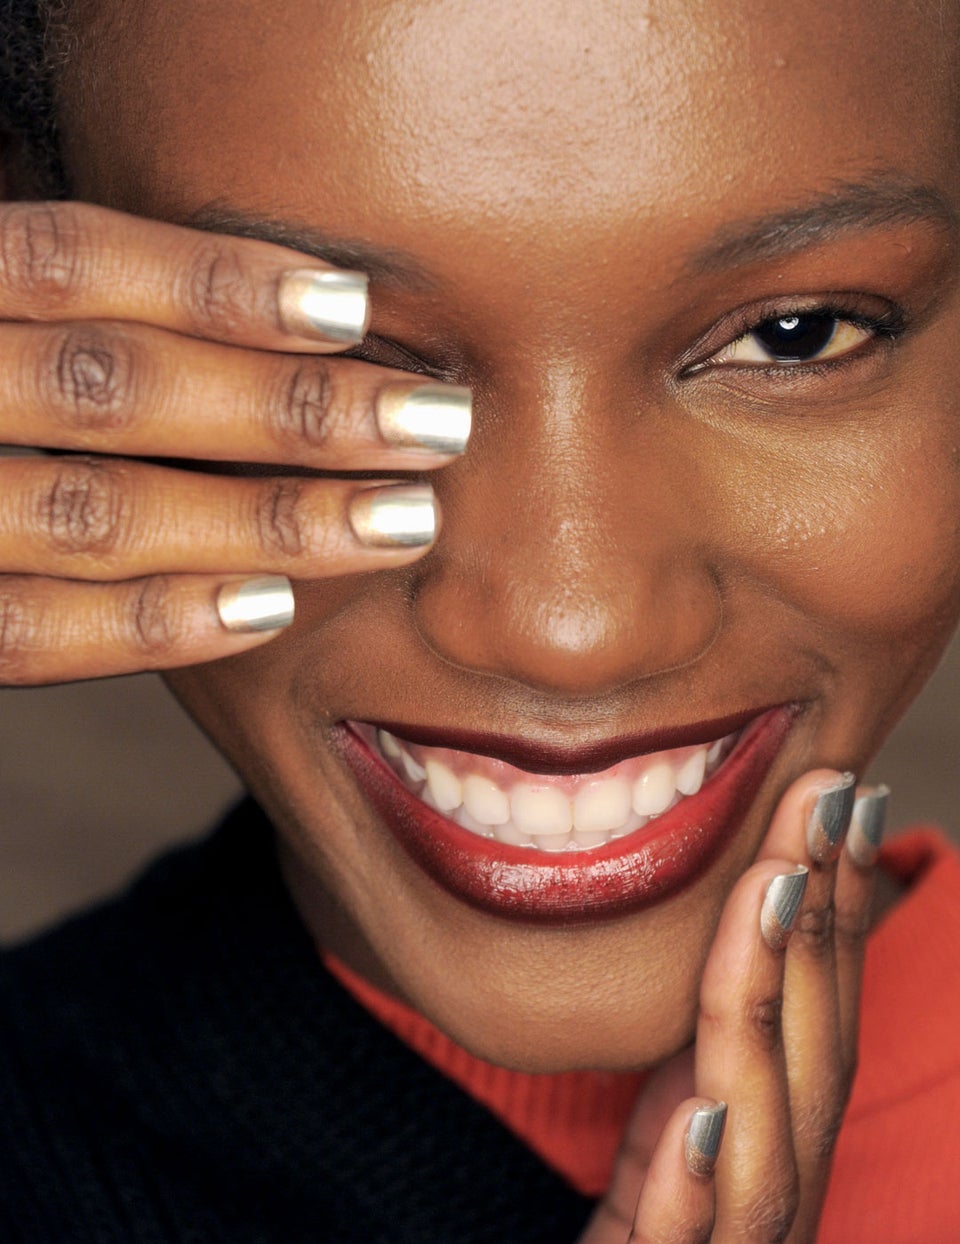 How To D.I.Y. Your Own Nail Polish Shade